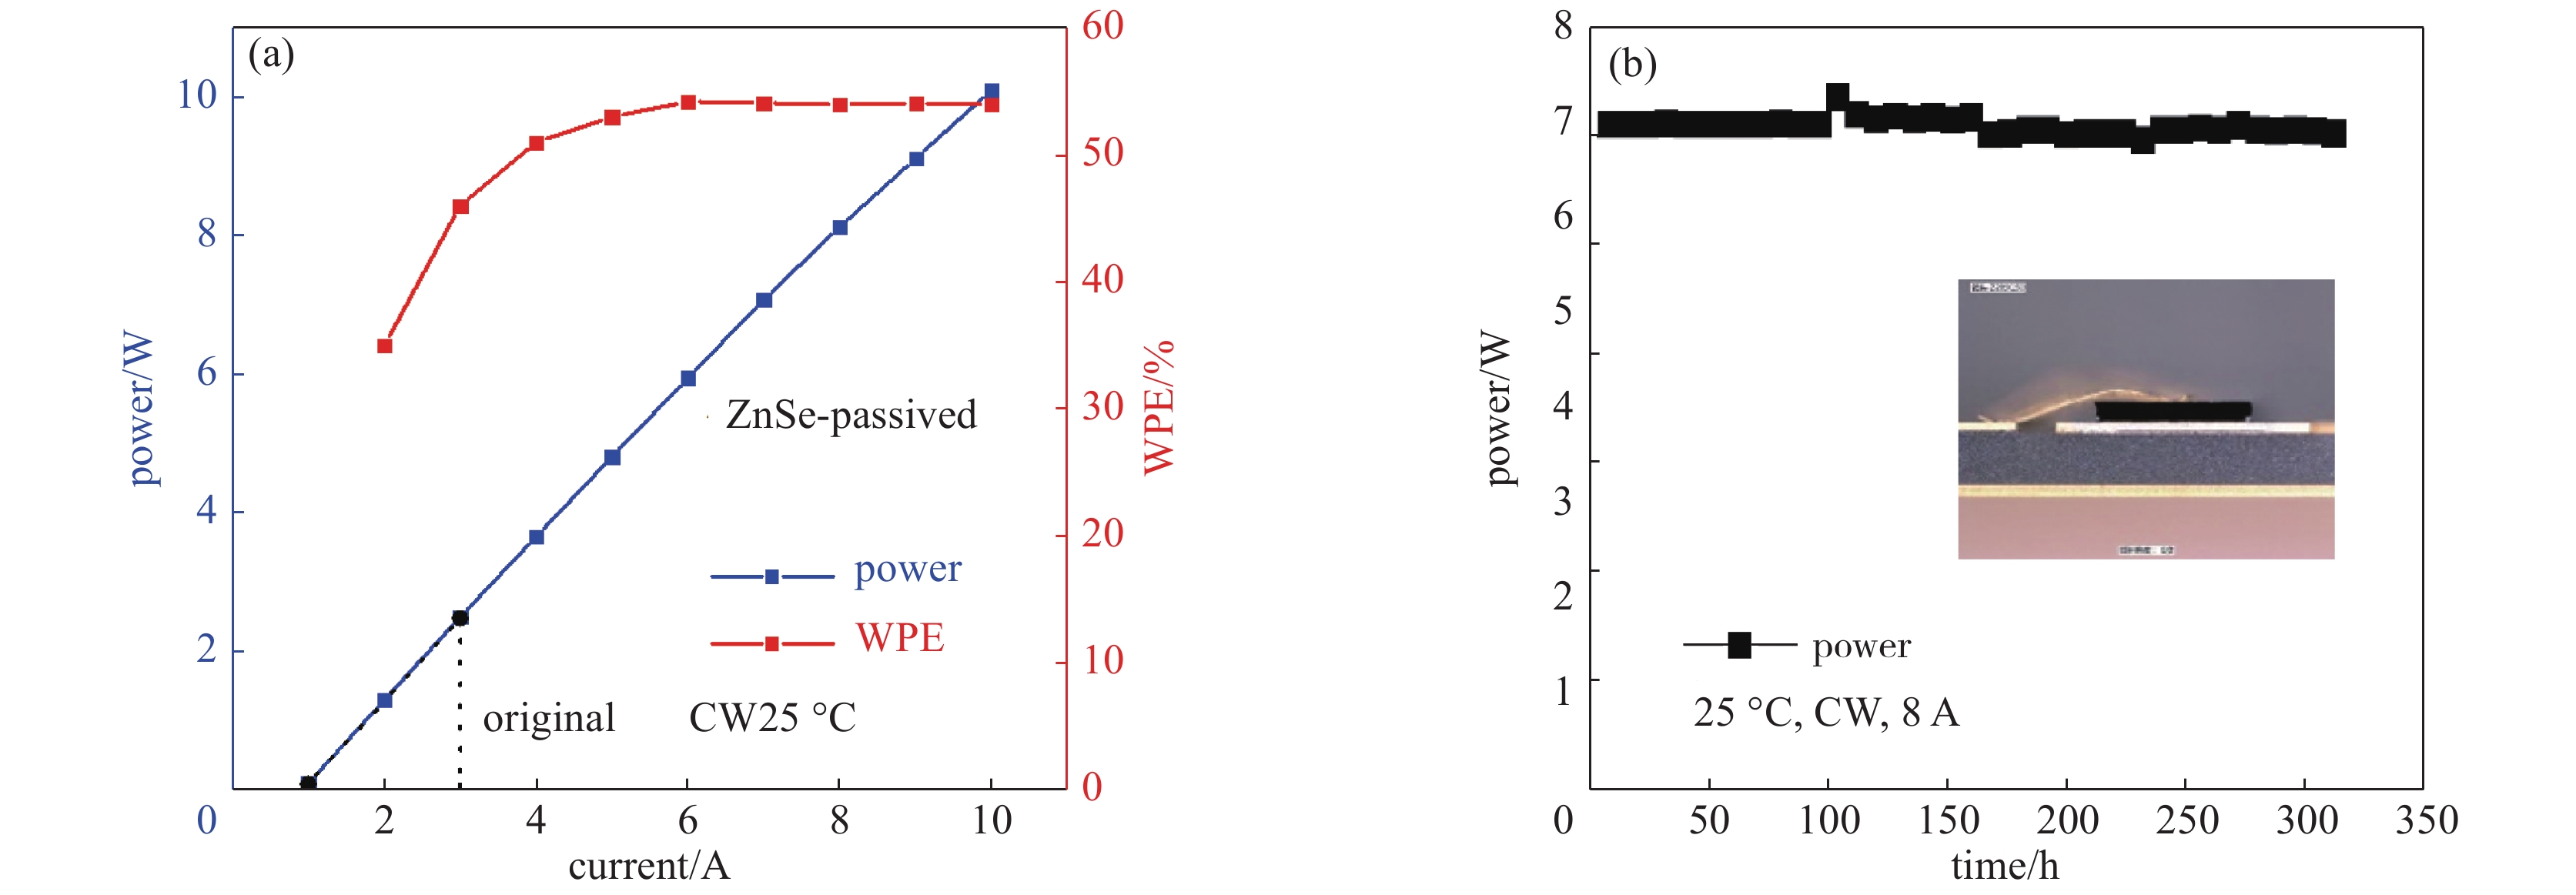 Power and wall-plug efficiency curves of 780 nm semiconductor laser